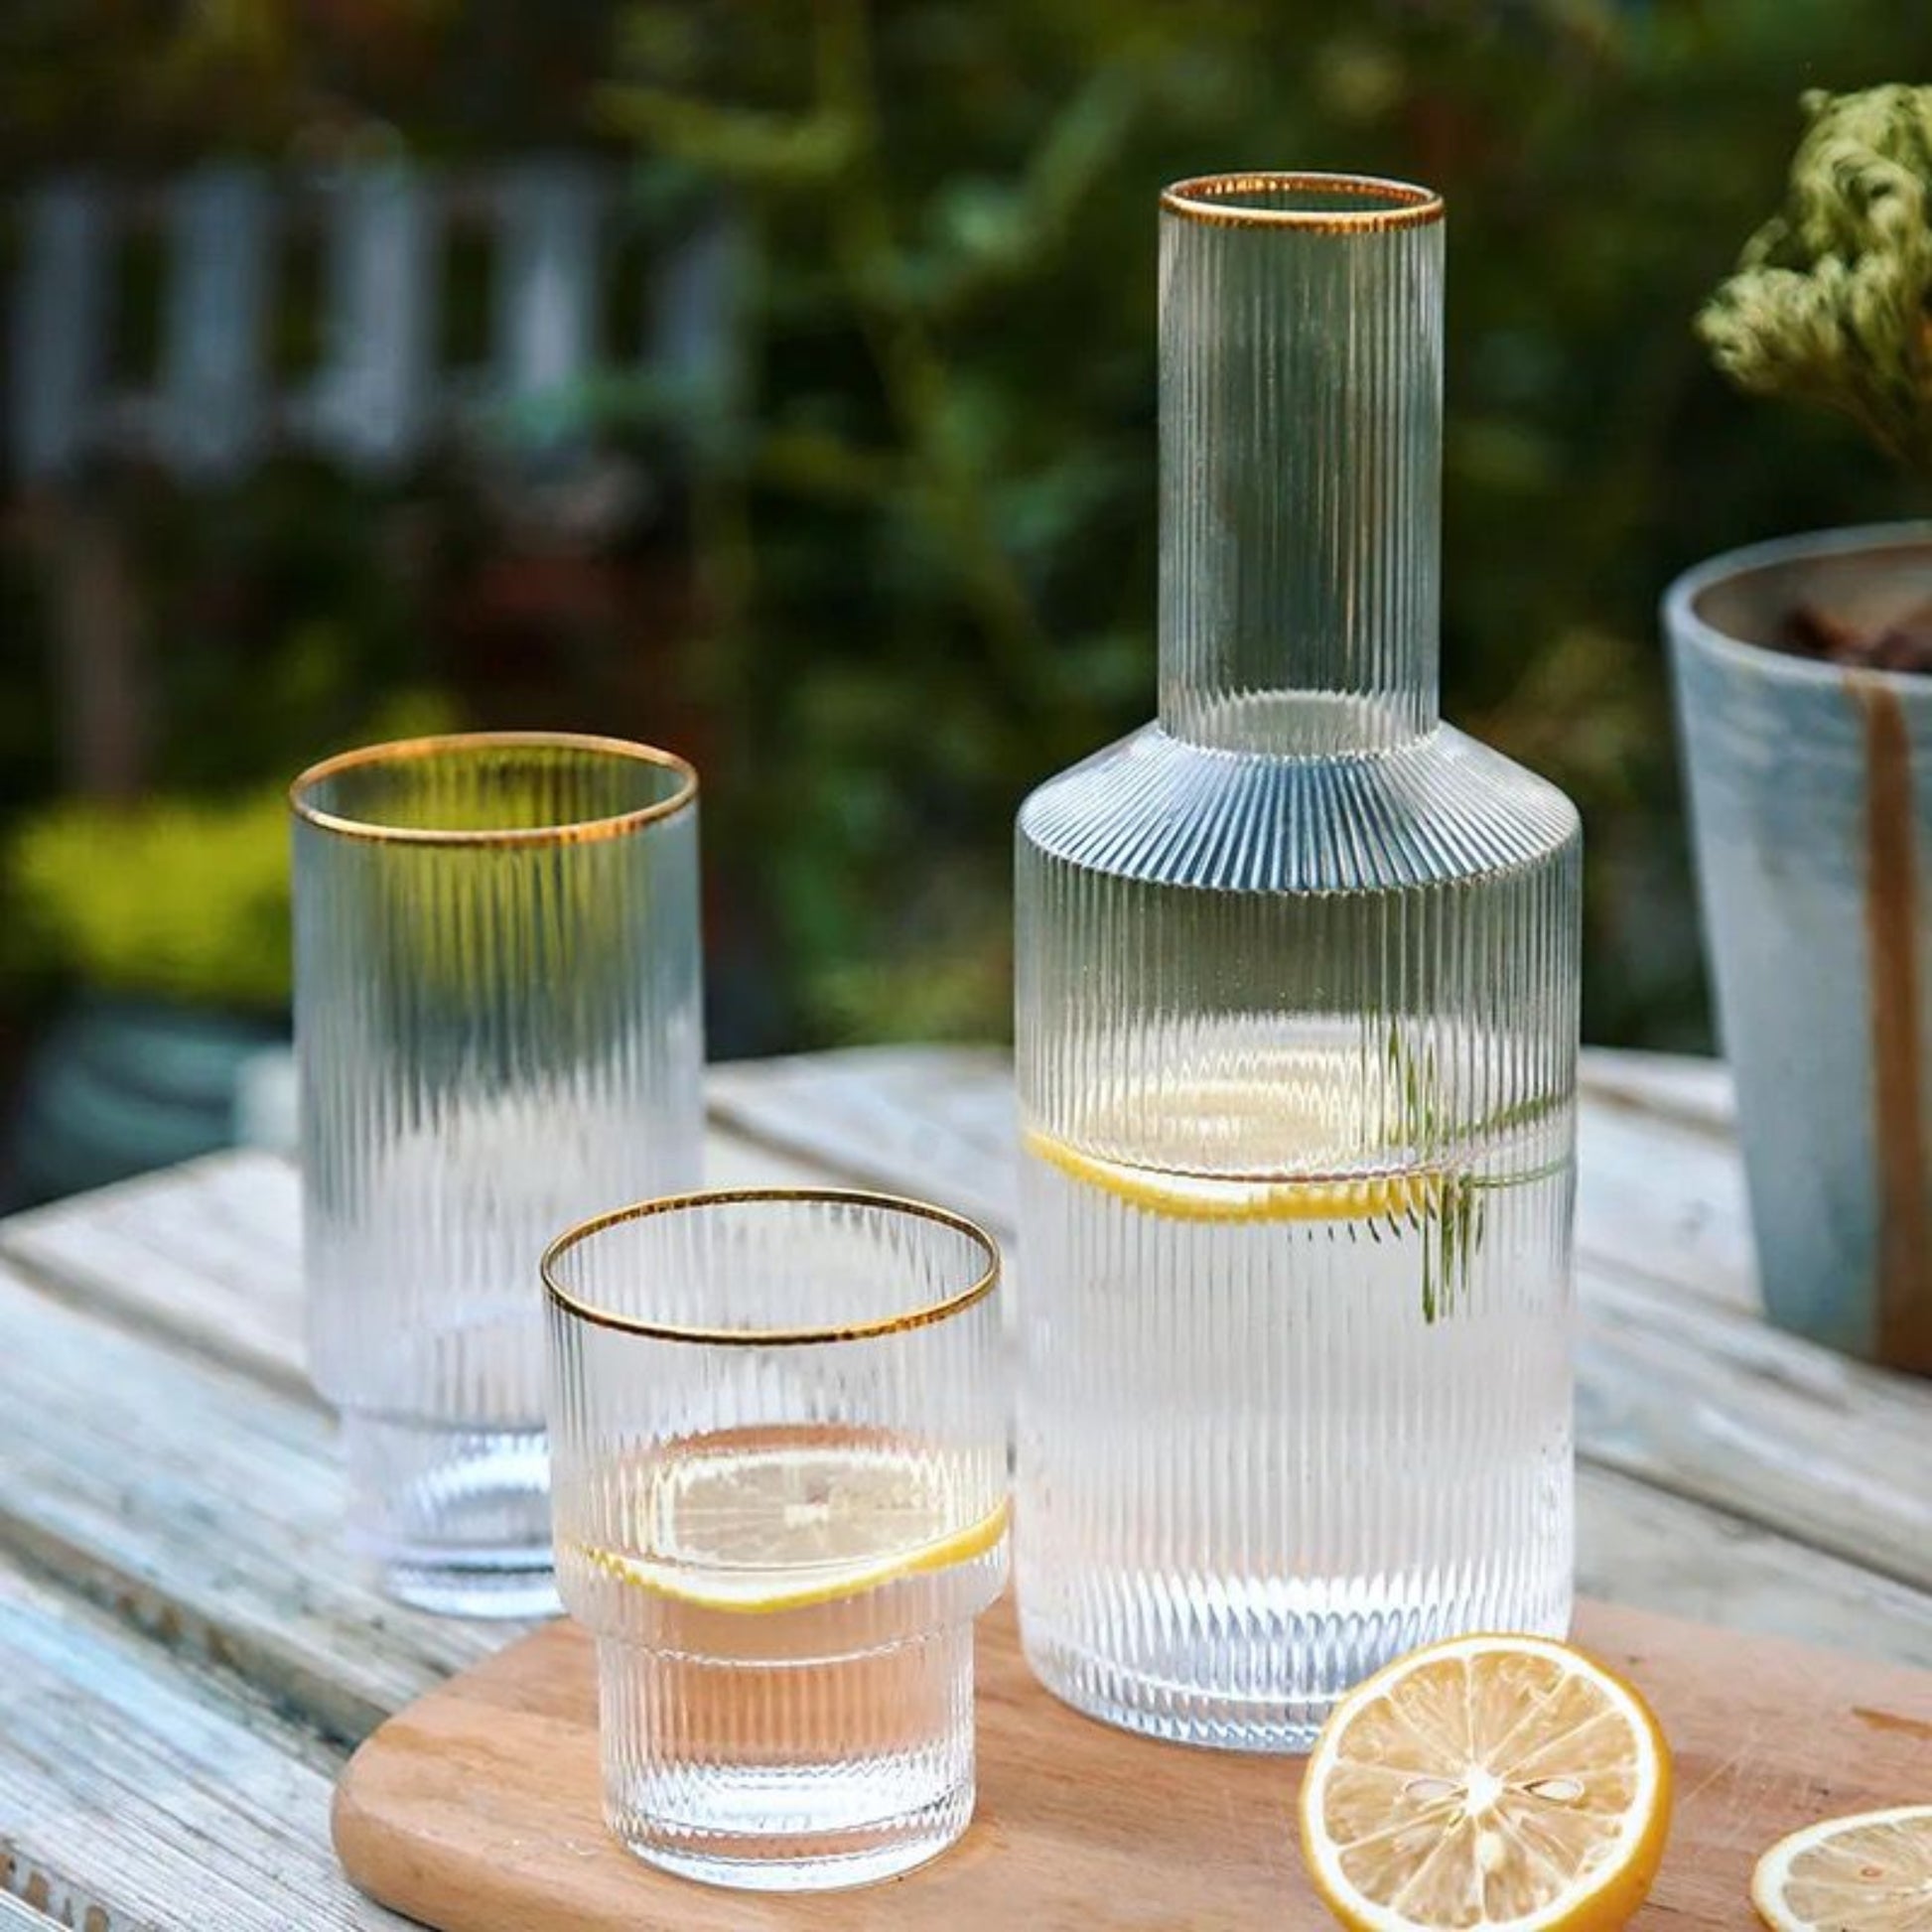 Izmir gold rim ripple glass carafe and glasses set on a table in the garden